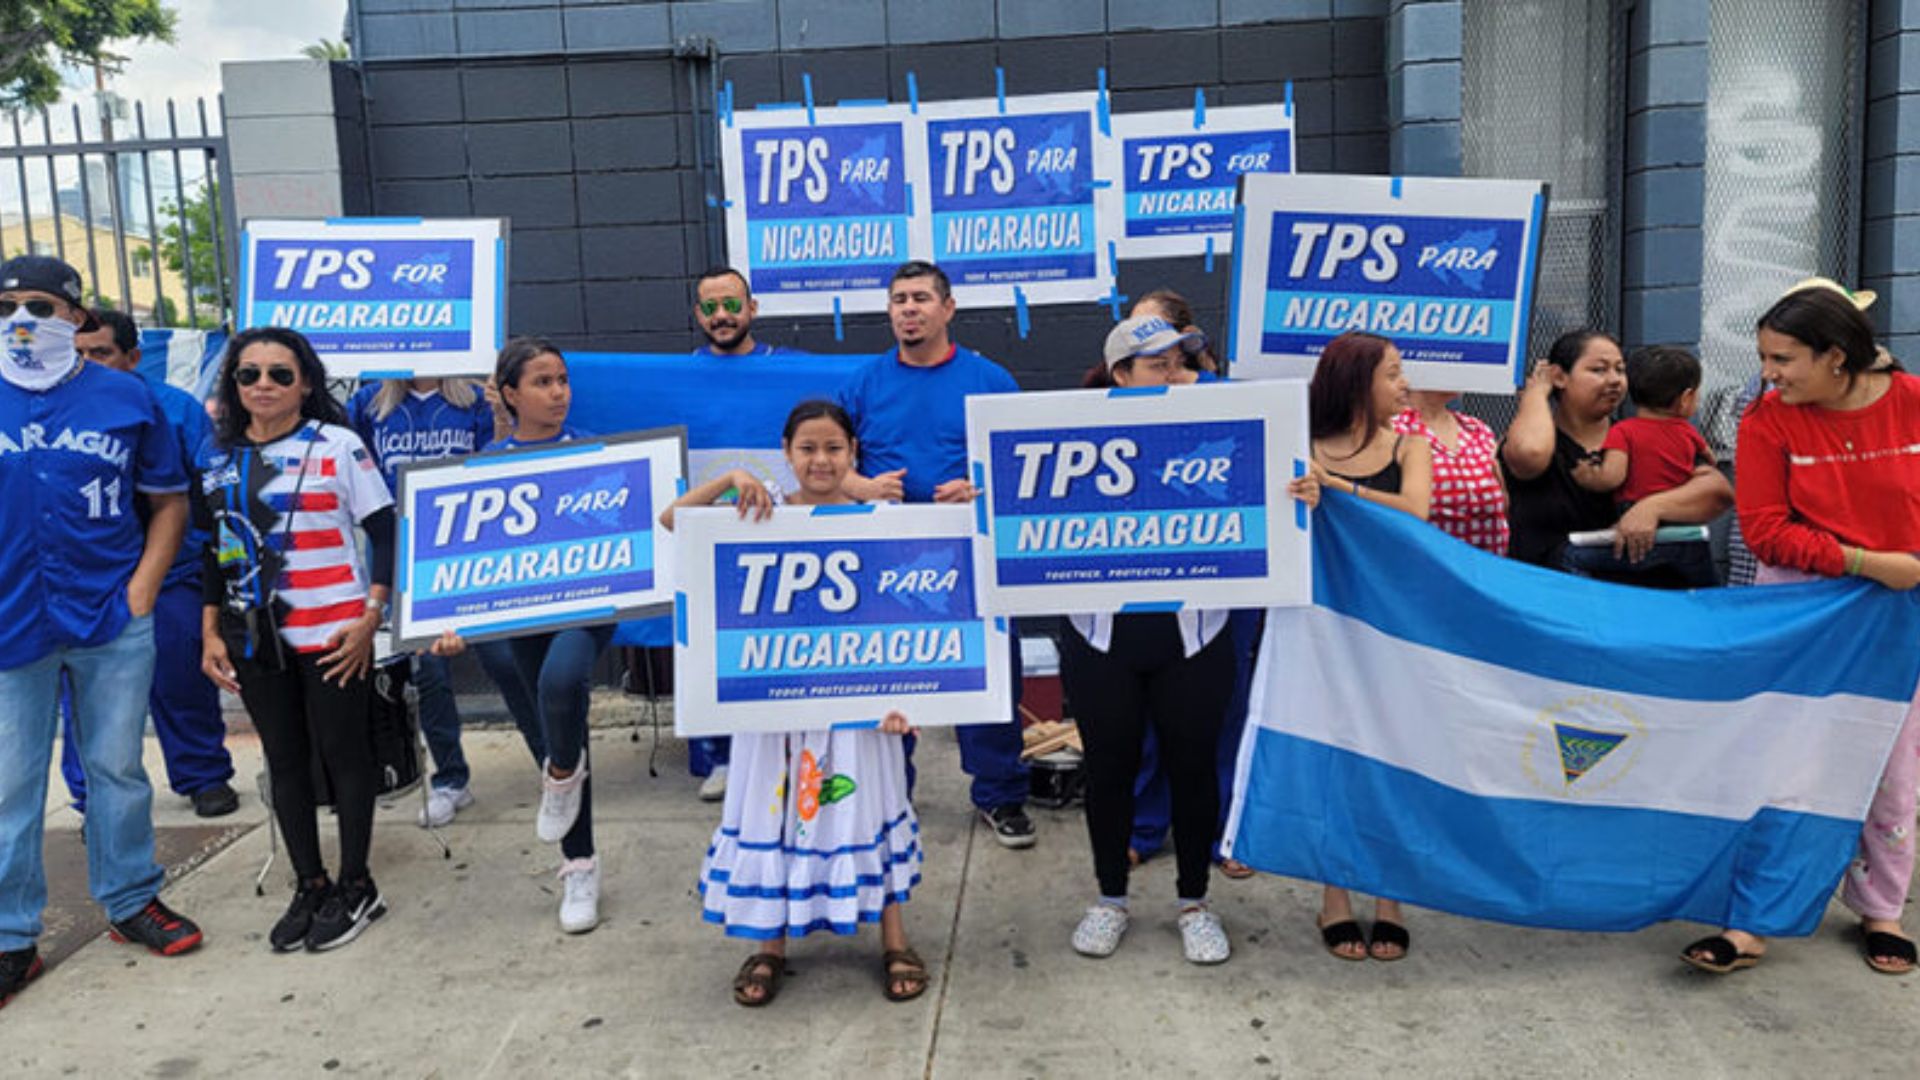 Opponents ask the US to approve a TPS that benefits persecuted politicians in Nicaragua